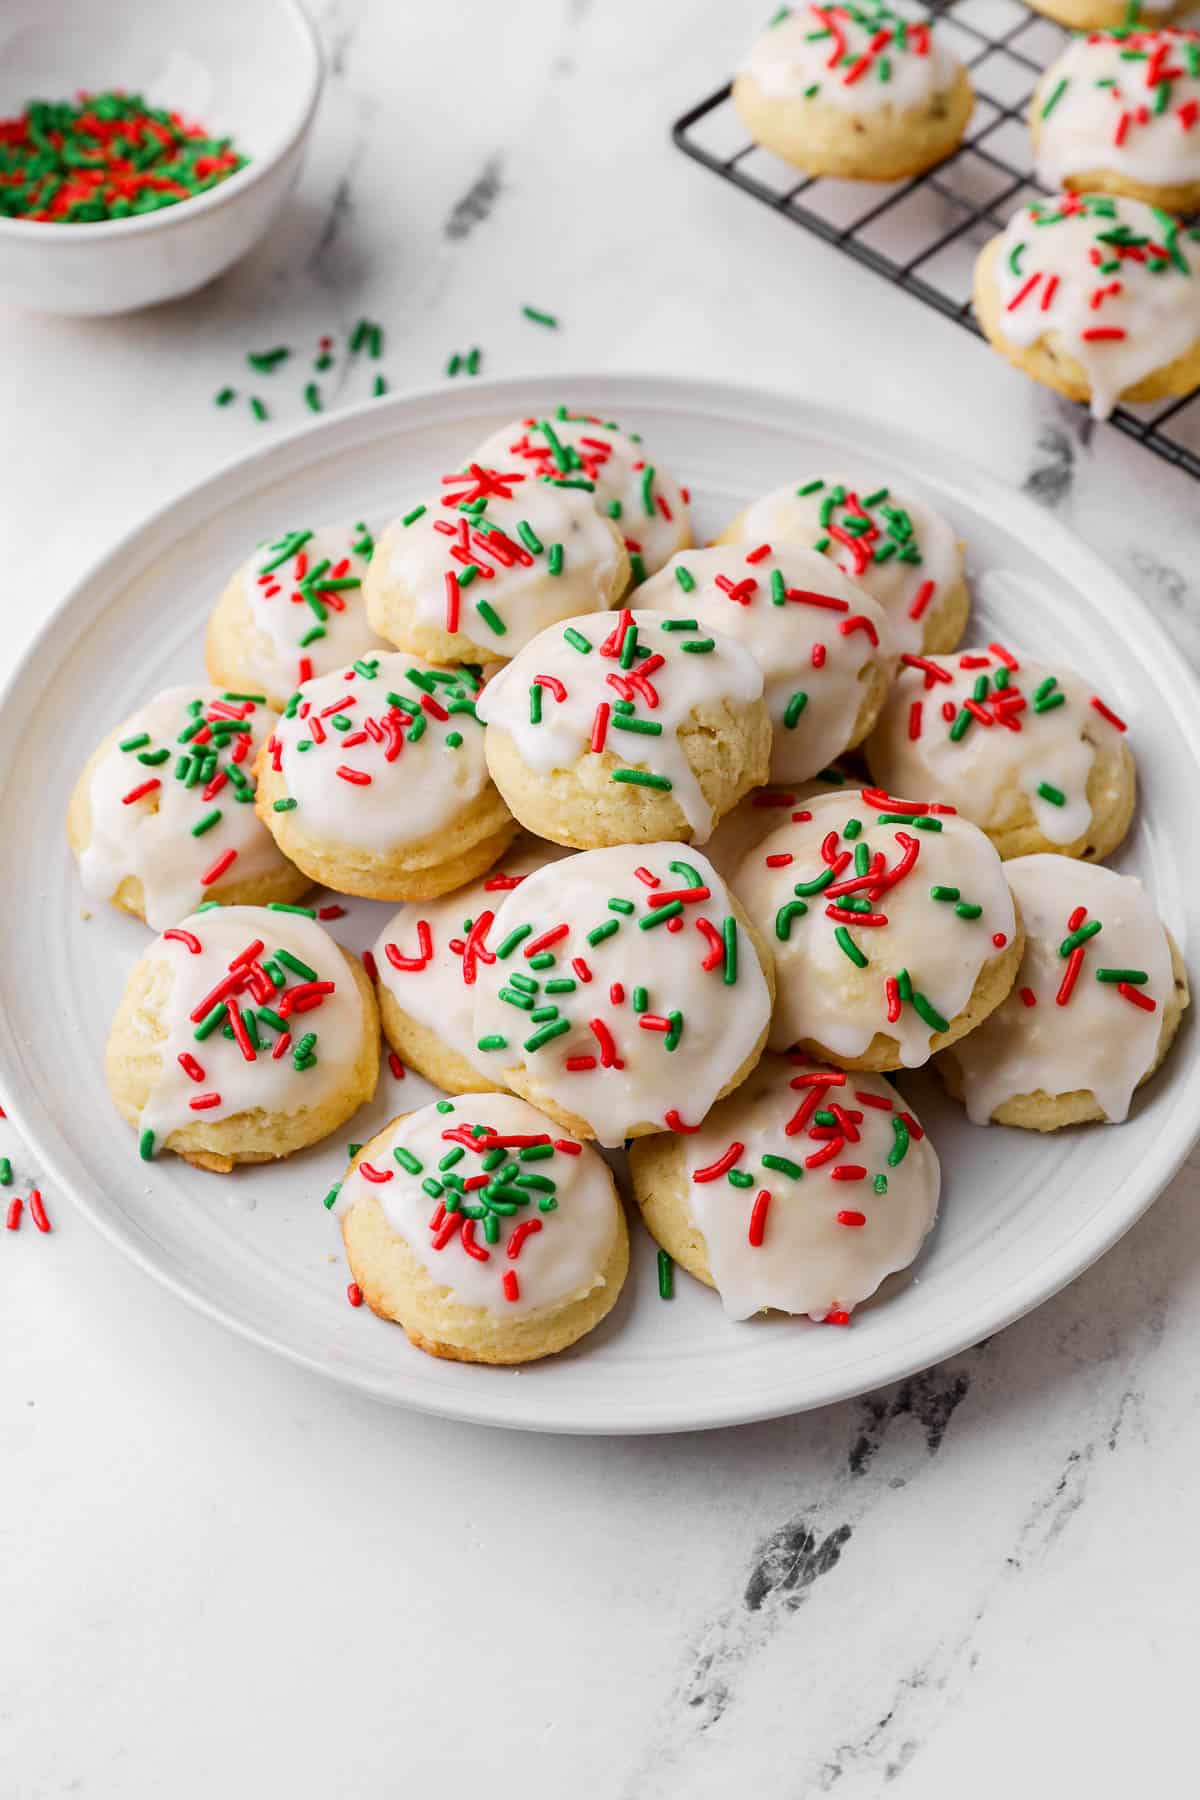 Italian iced christmas cookies with decorated with holiday green and red sprinkles with a small bowl of extra sprinkles nearby and a cooling rack with more cookies.